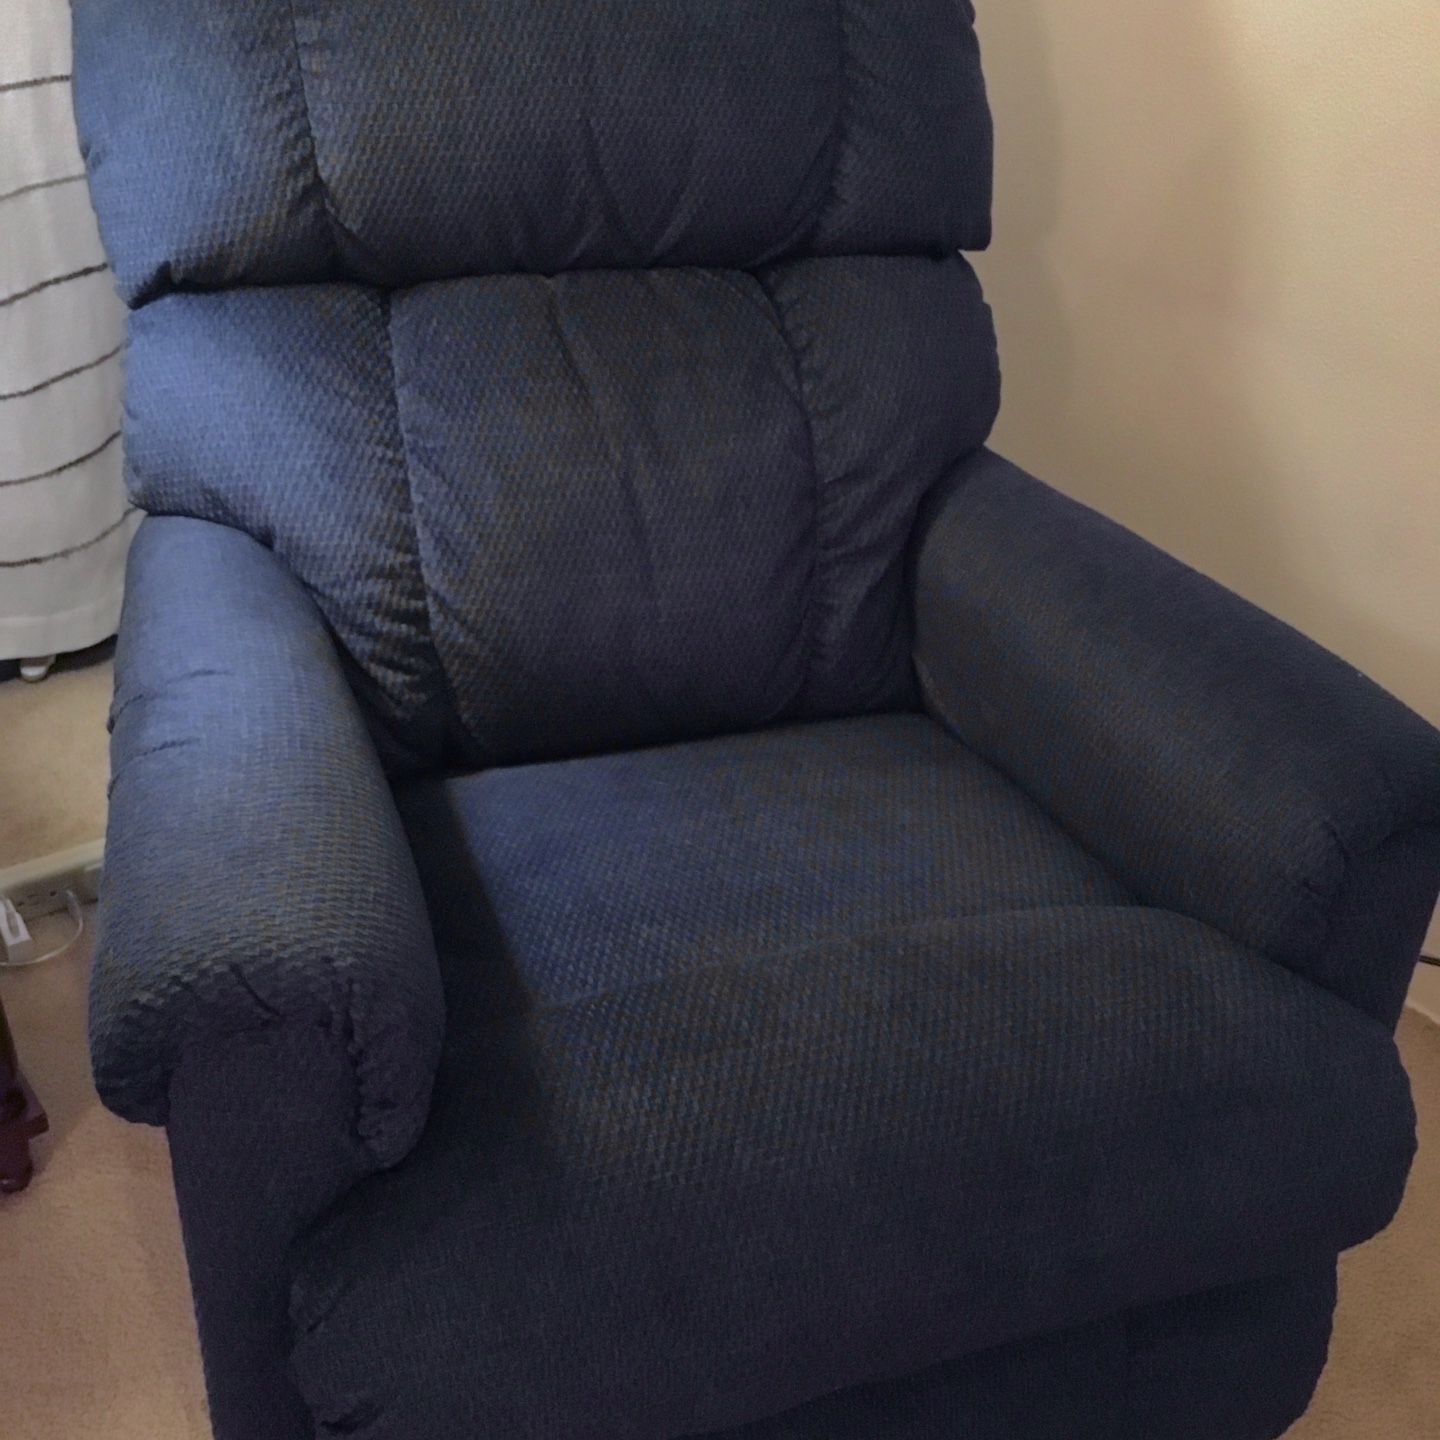 LIKE BRAND NEW  /  NO FLAWS  /  VERY LIGHTLY USED FOR SHORT PERIOD OF TIME  /   $450-----LAZY BOY POWER RECLINER WITH LUMBAR SUPPORT